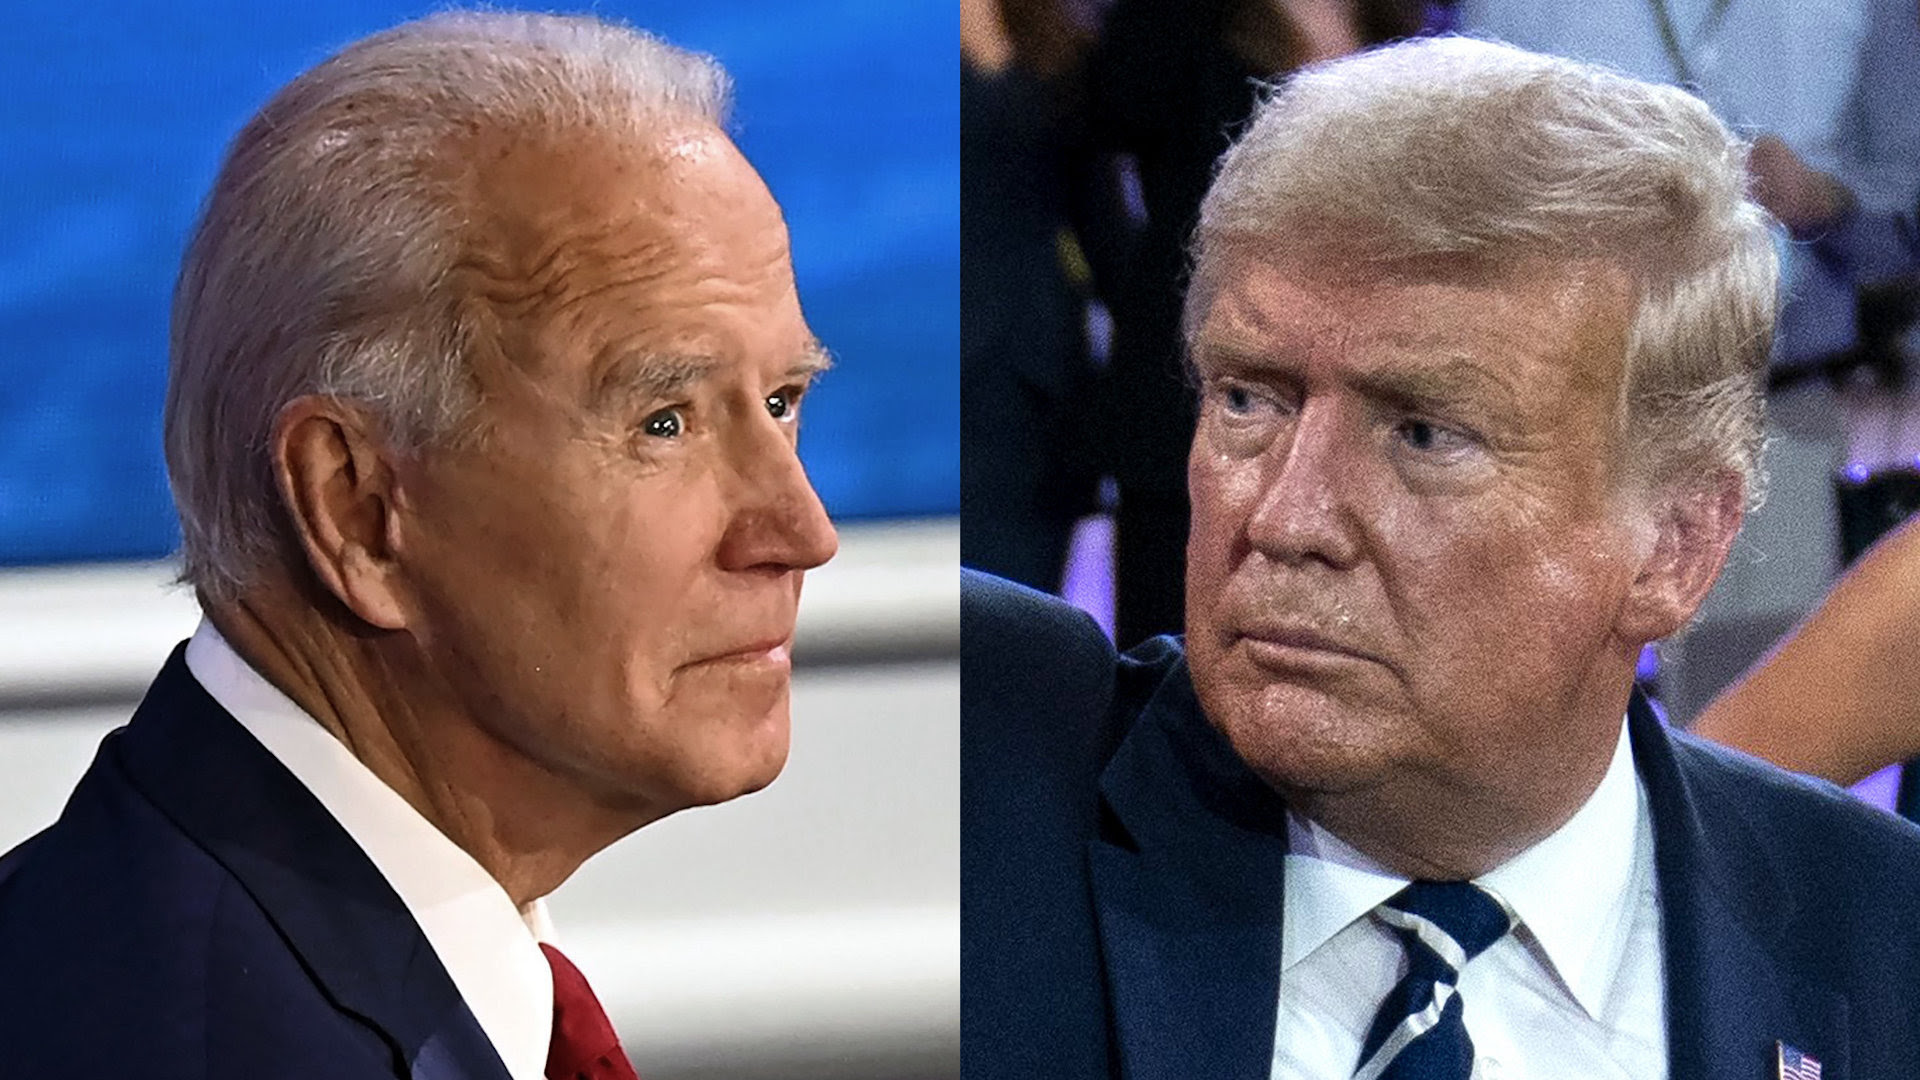 VIDEO: All the highlights from Trump and Biden's dueling town halls